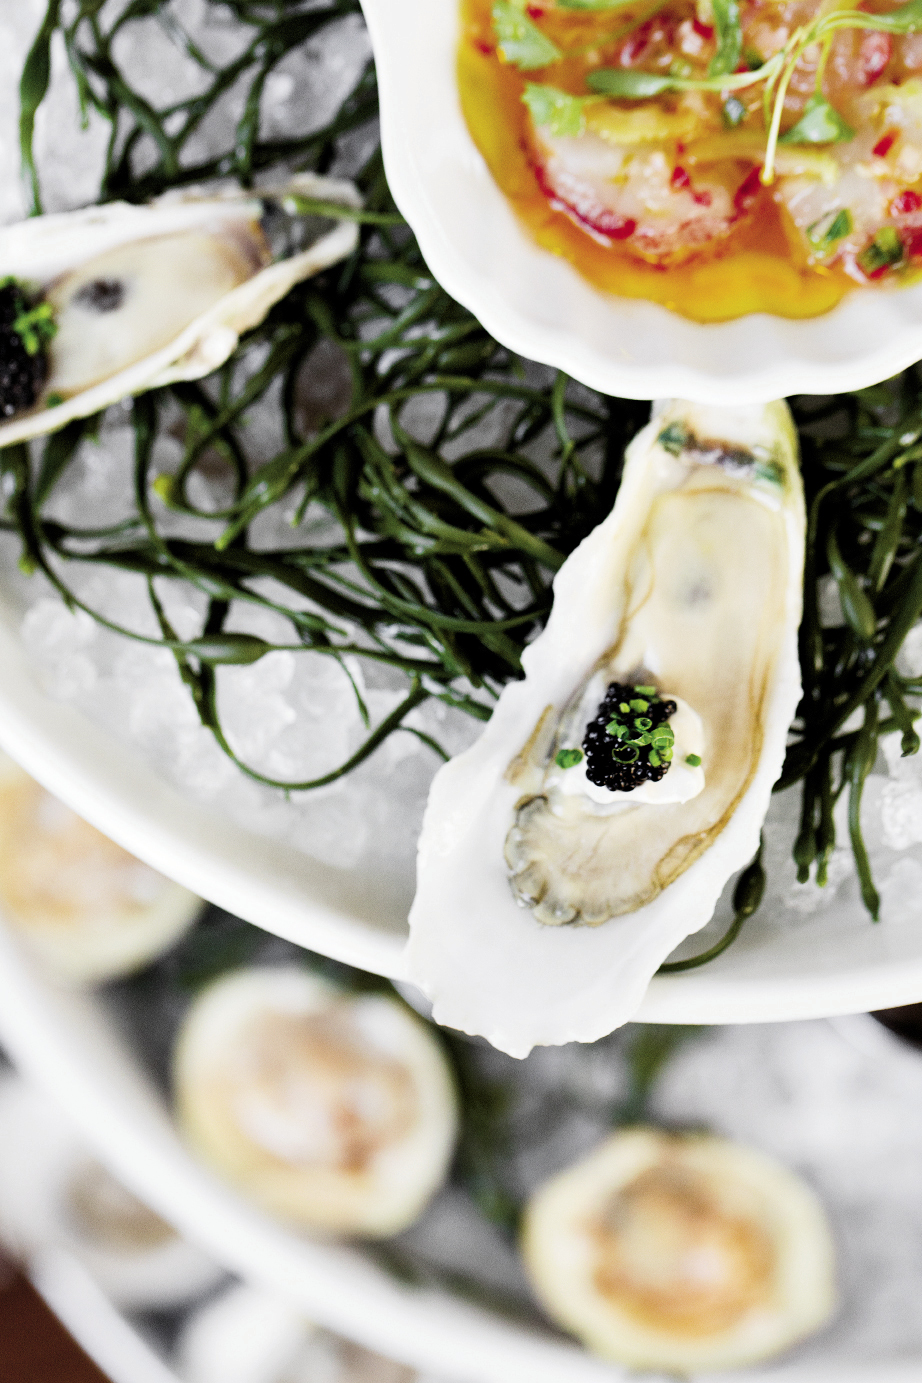 Clammer Dave’s pristine Caper’s Blades oysters make appearances at fine restaurants all over town—with caviar at Charleston’s The Ordinary